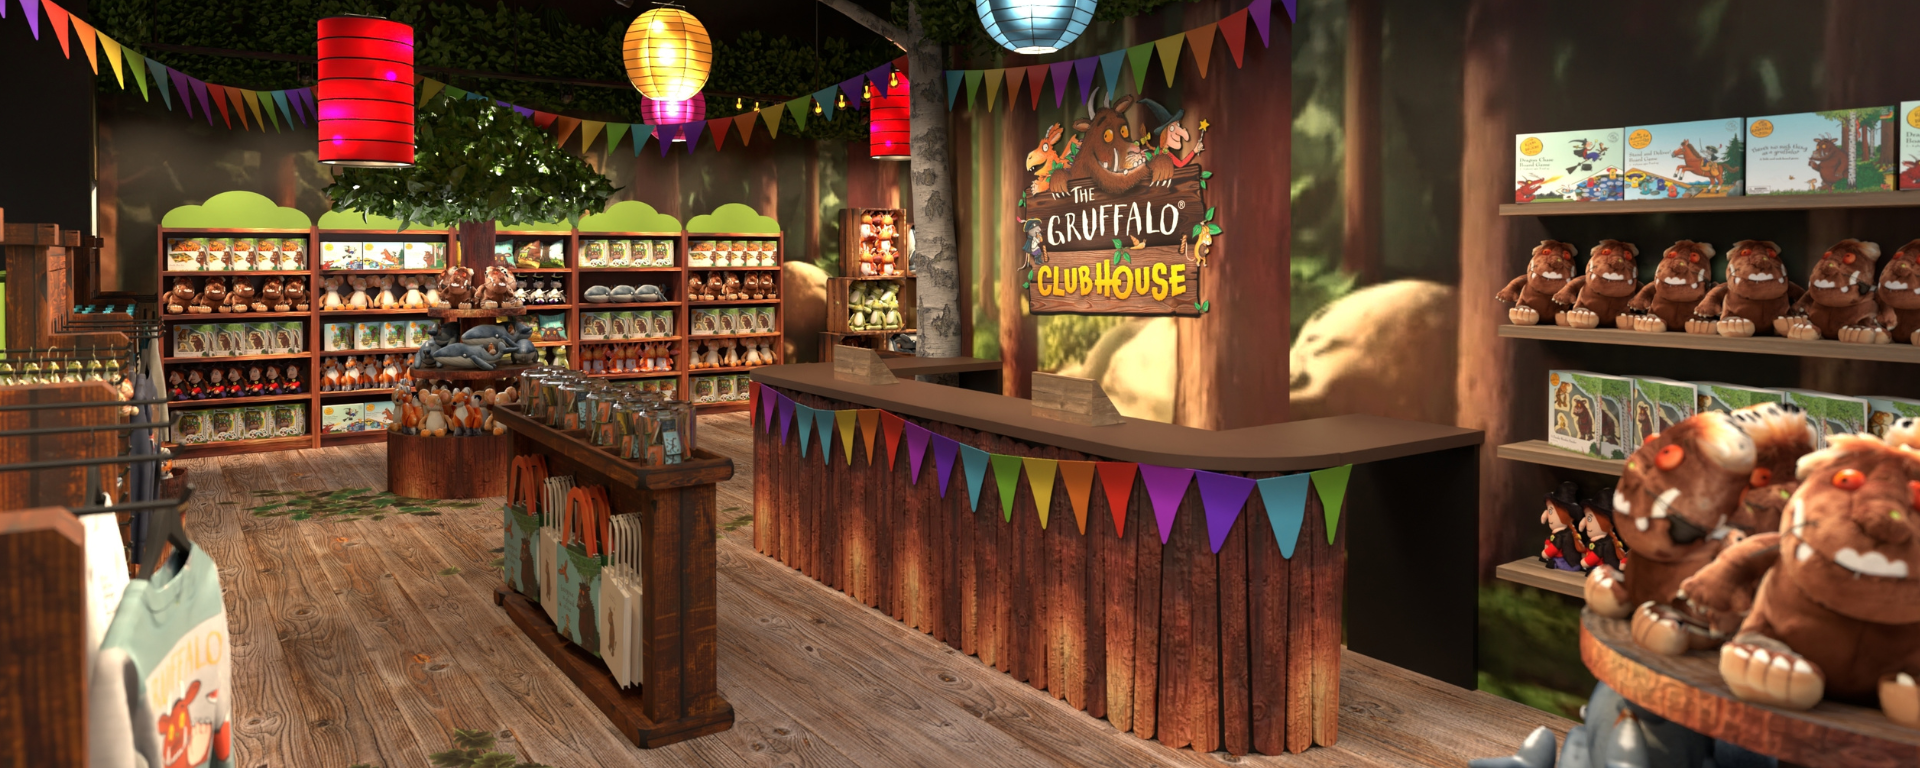 Gruffalo And Friends Clubhouse Gift Shop 5.2